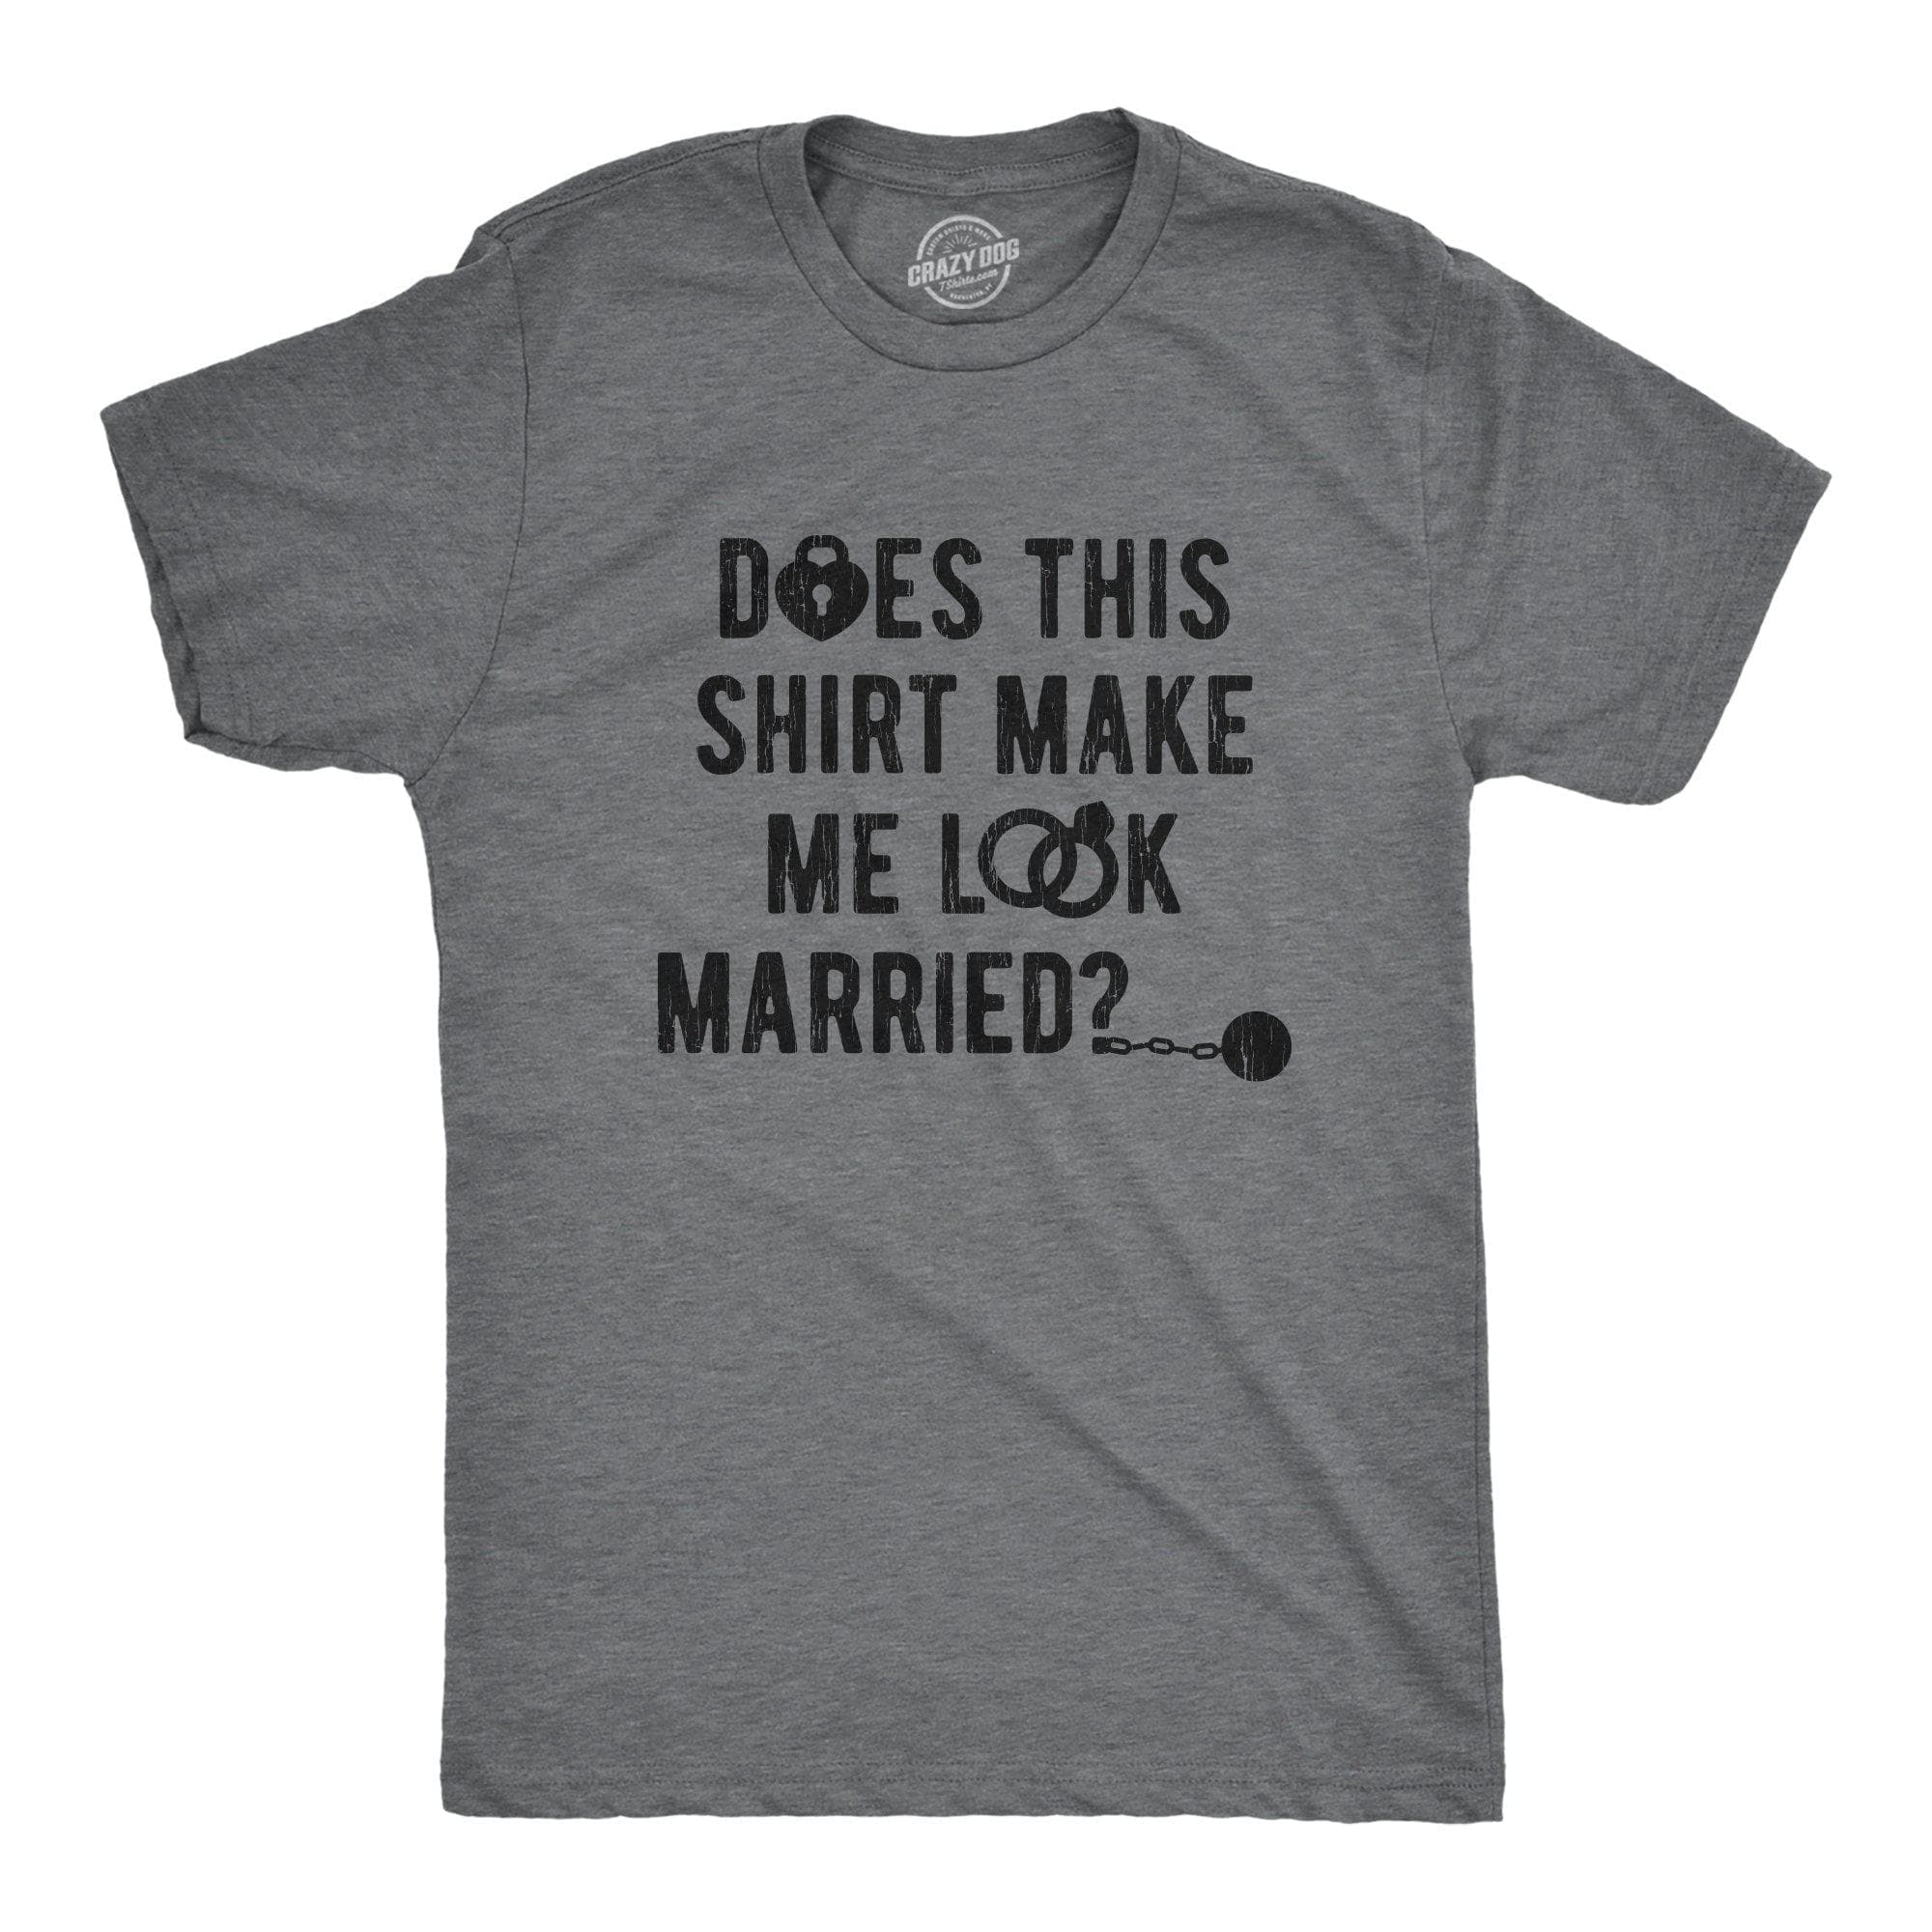 Deos This Shirt Make Me Look Married? Men's Tshirt - Crazy Dog T-Shirts